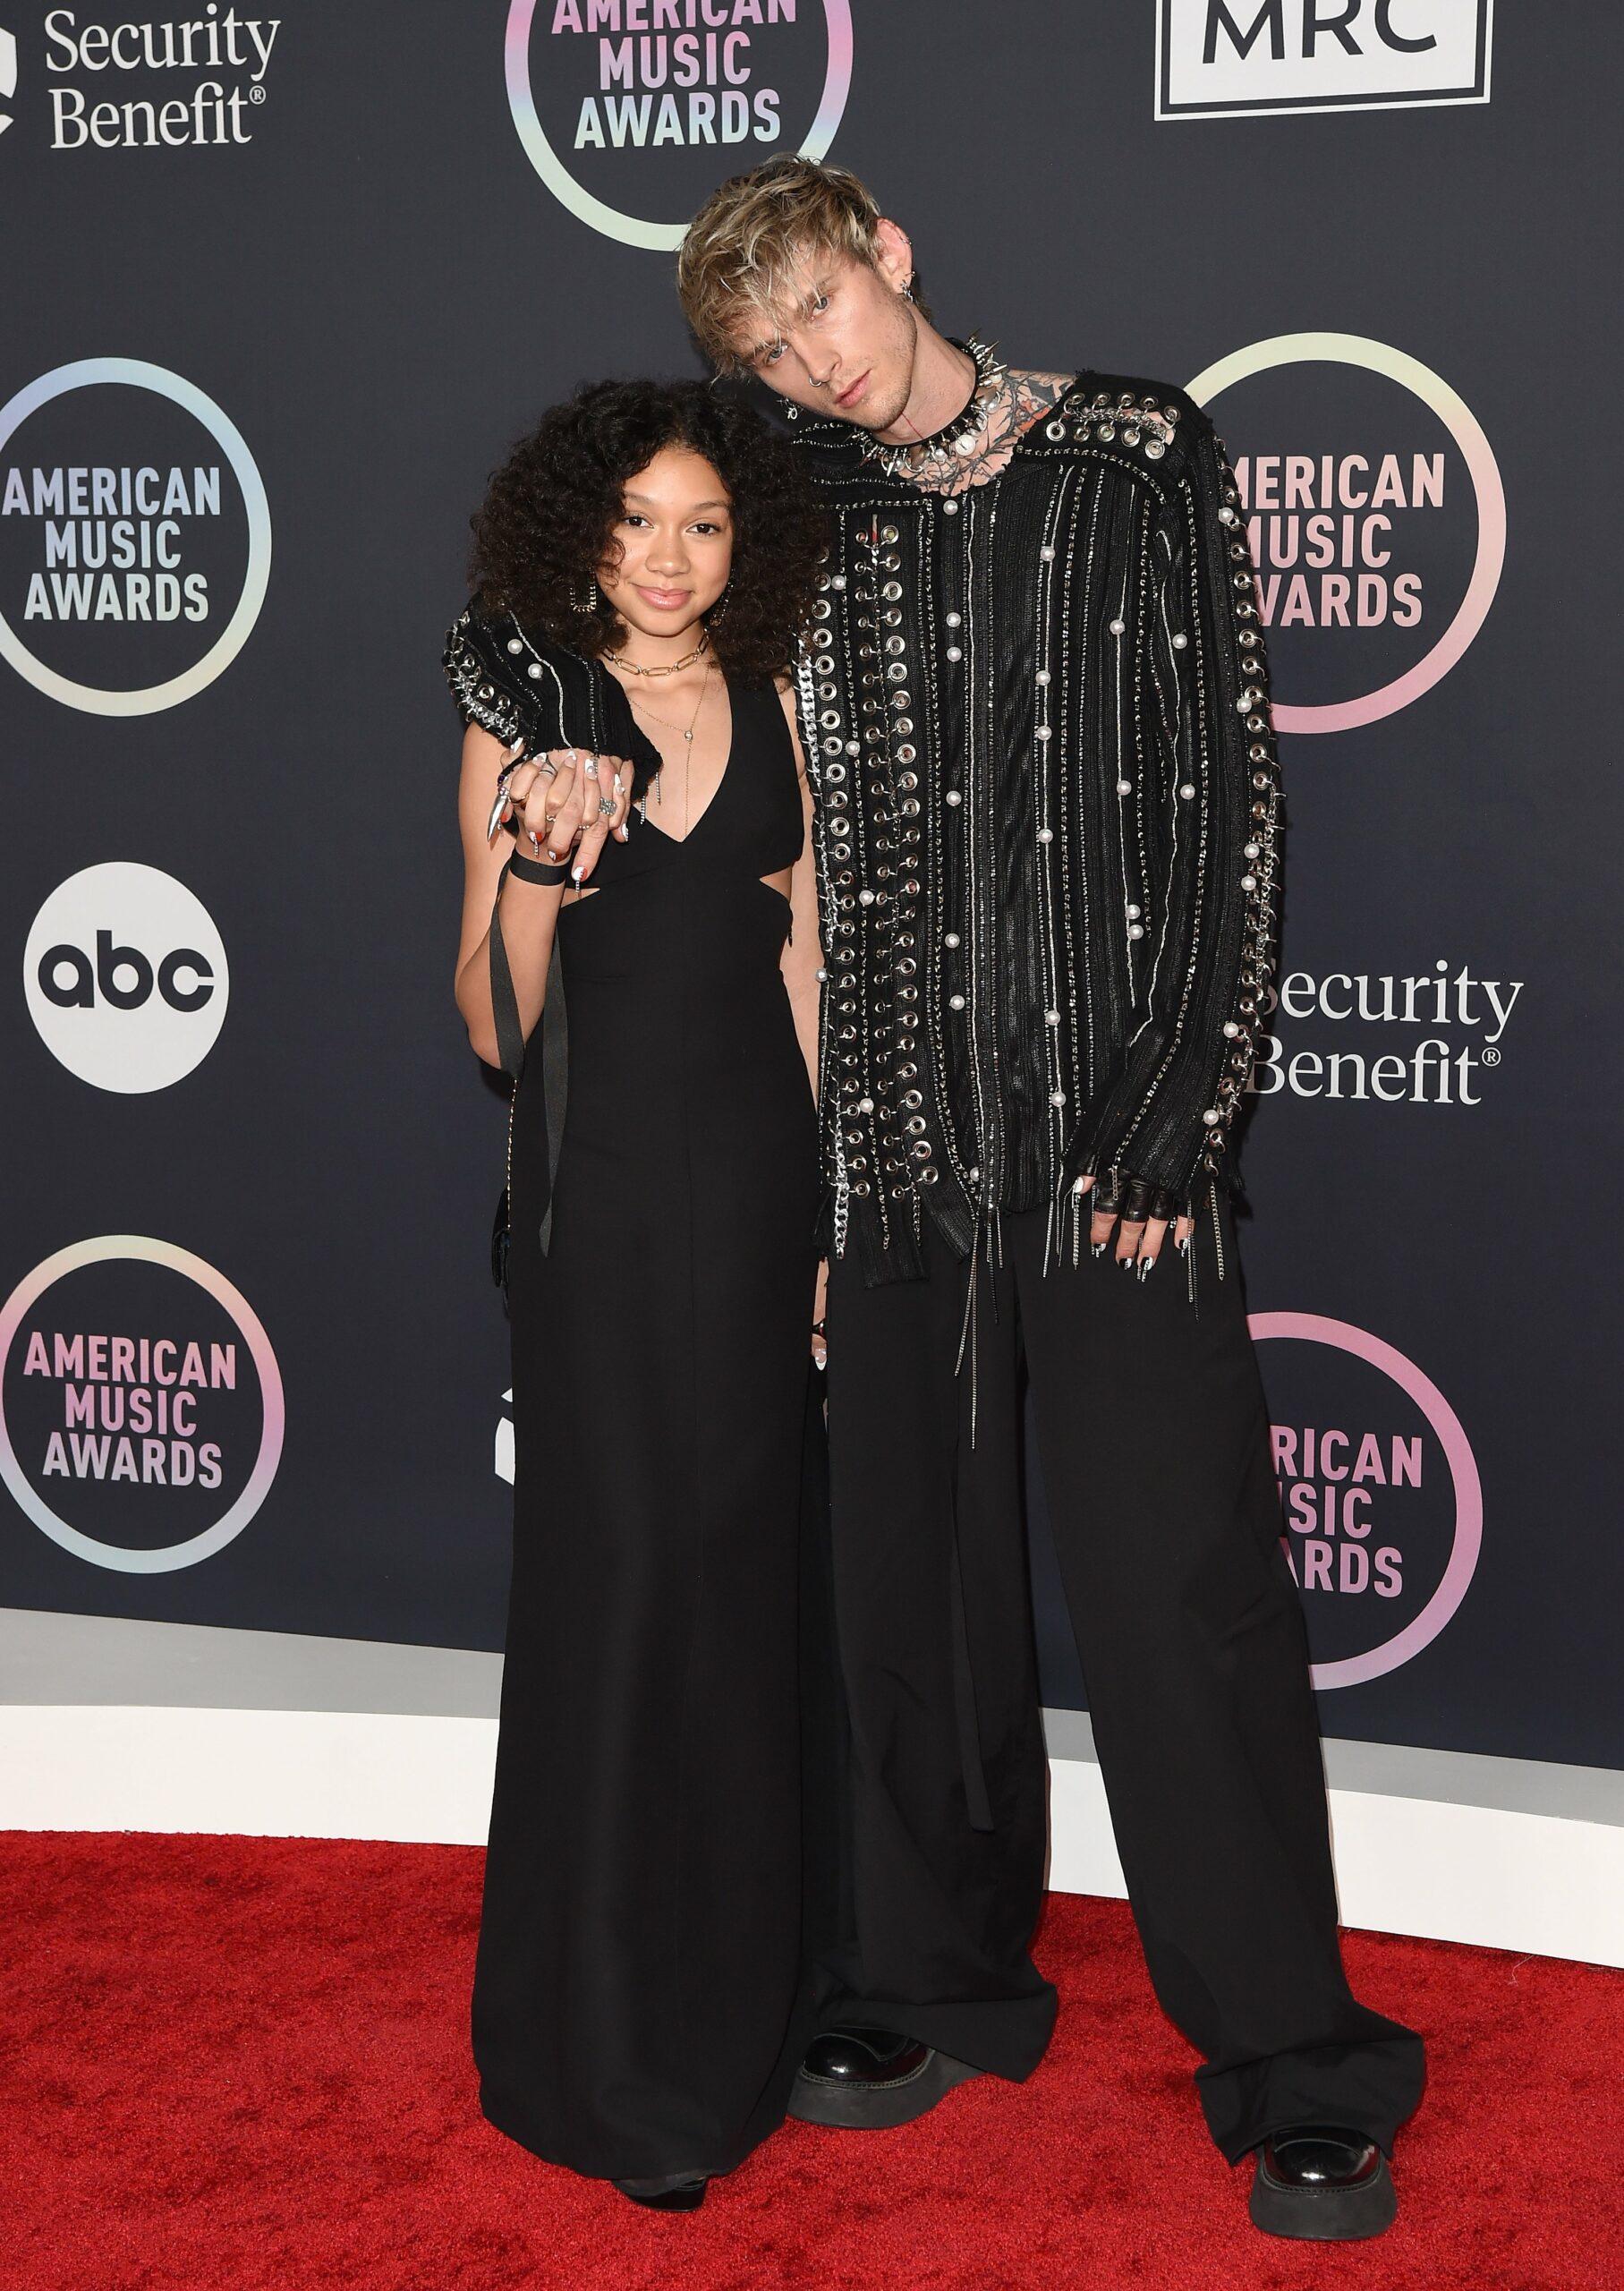 Machine Gun Kelly and daughter pose for the camera.